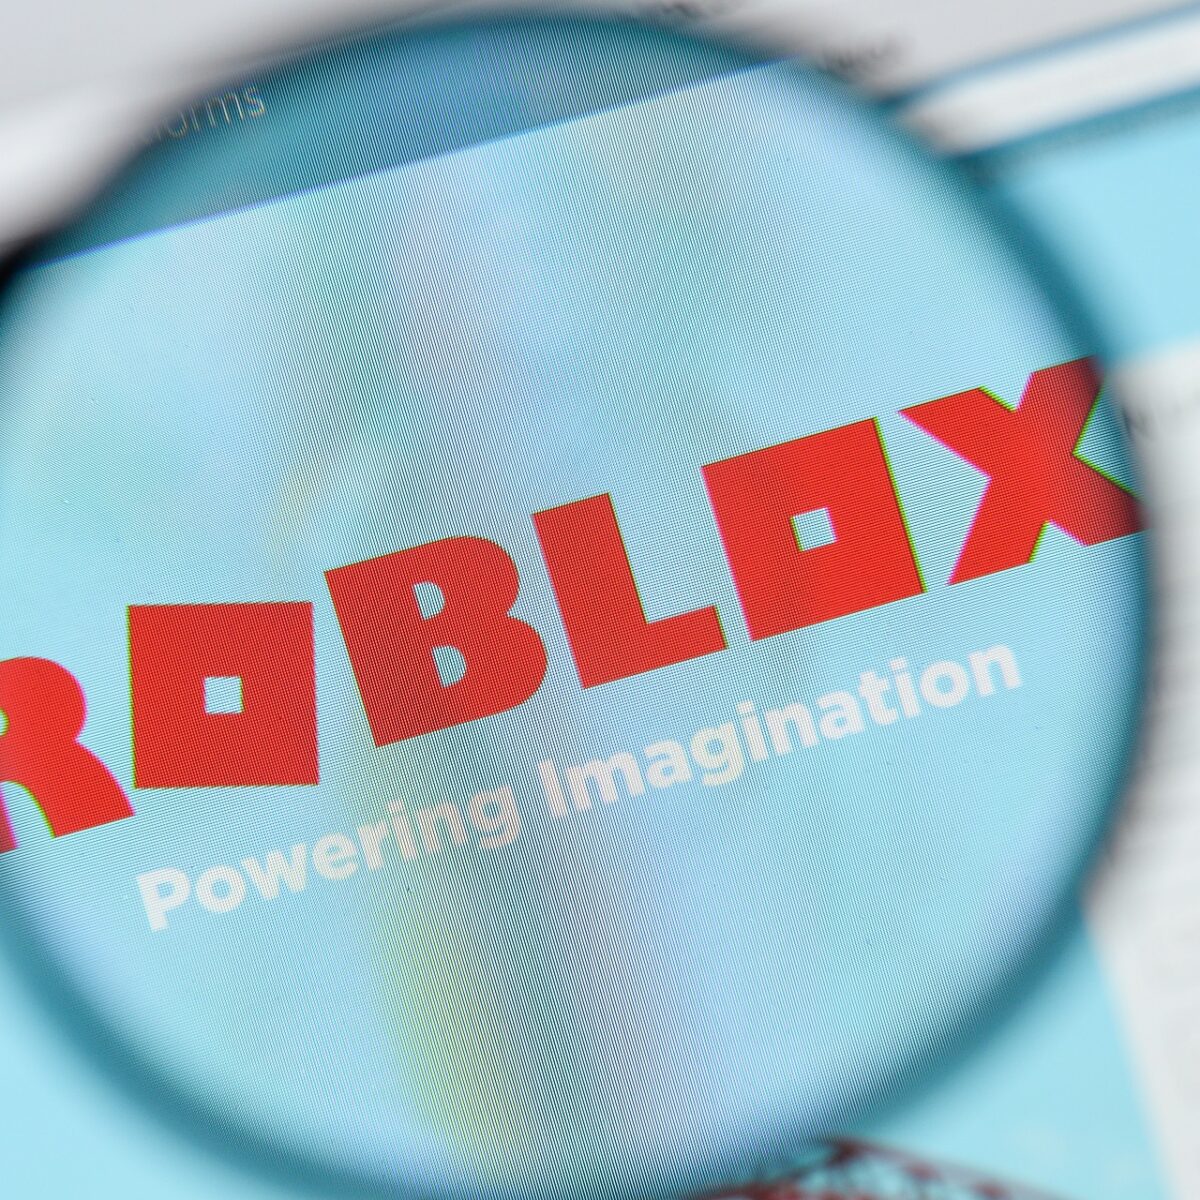 Fix Your Browser Is Not Supported Roblox Error - how to get roblox plus on opera gx